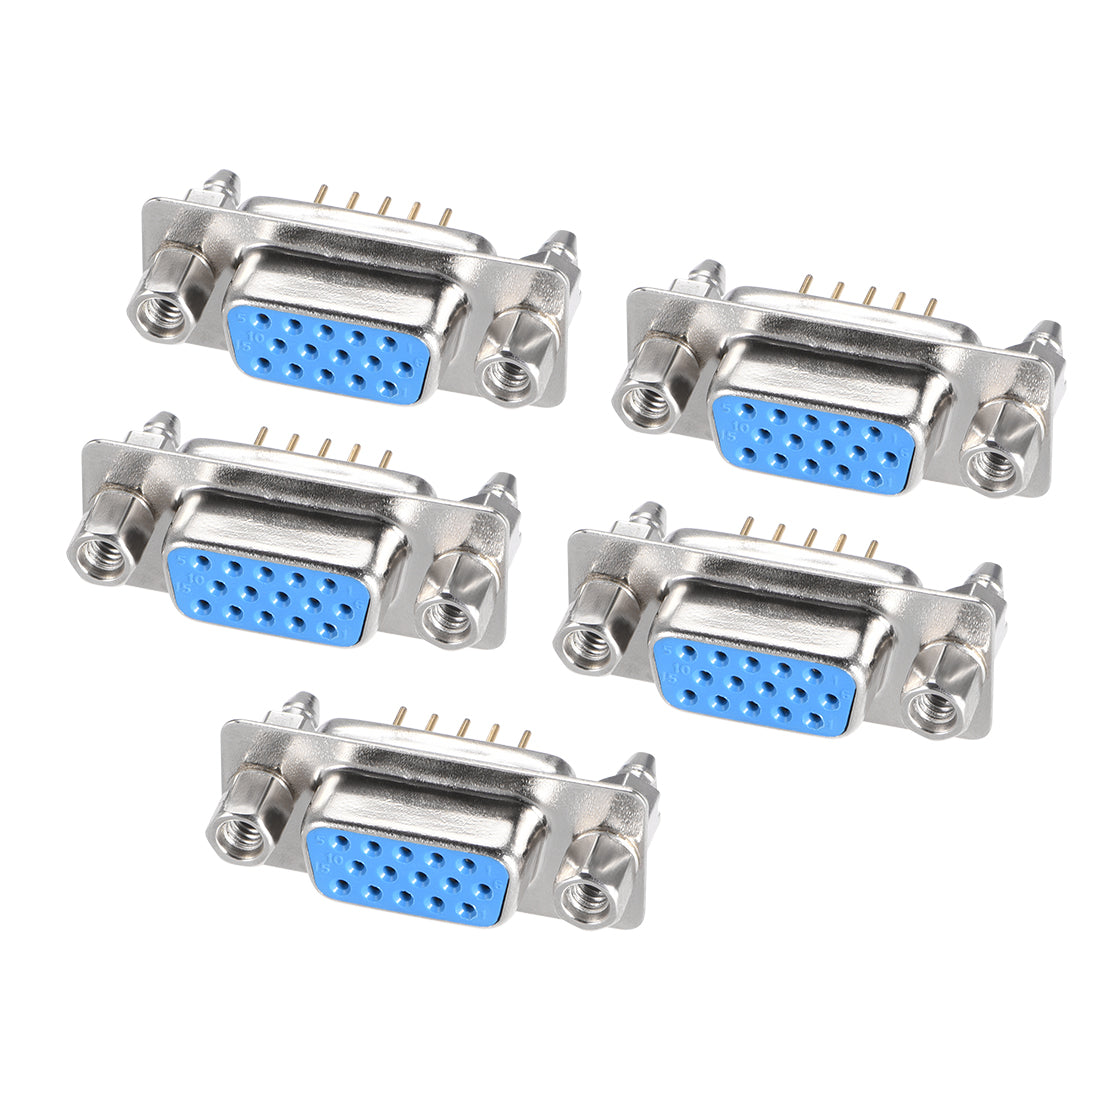 uxcell Uxcell D-sub Connector Female Socket 15-position 3-row Board Lock Port Terminal Breakout for Mechanical Equipment Blue 5pcs